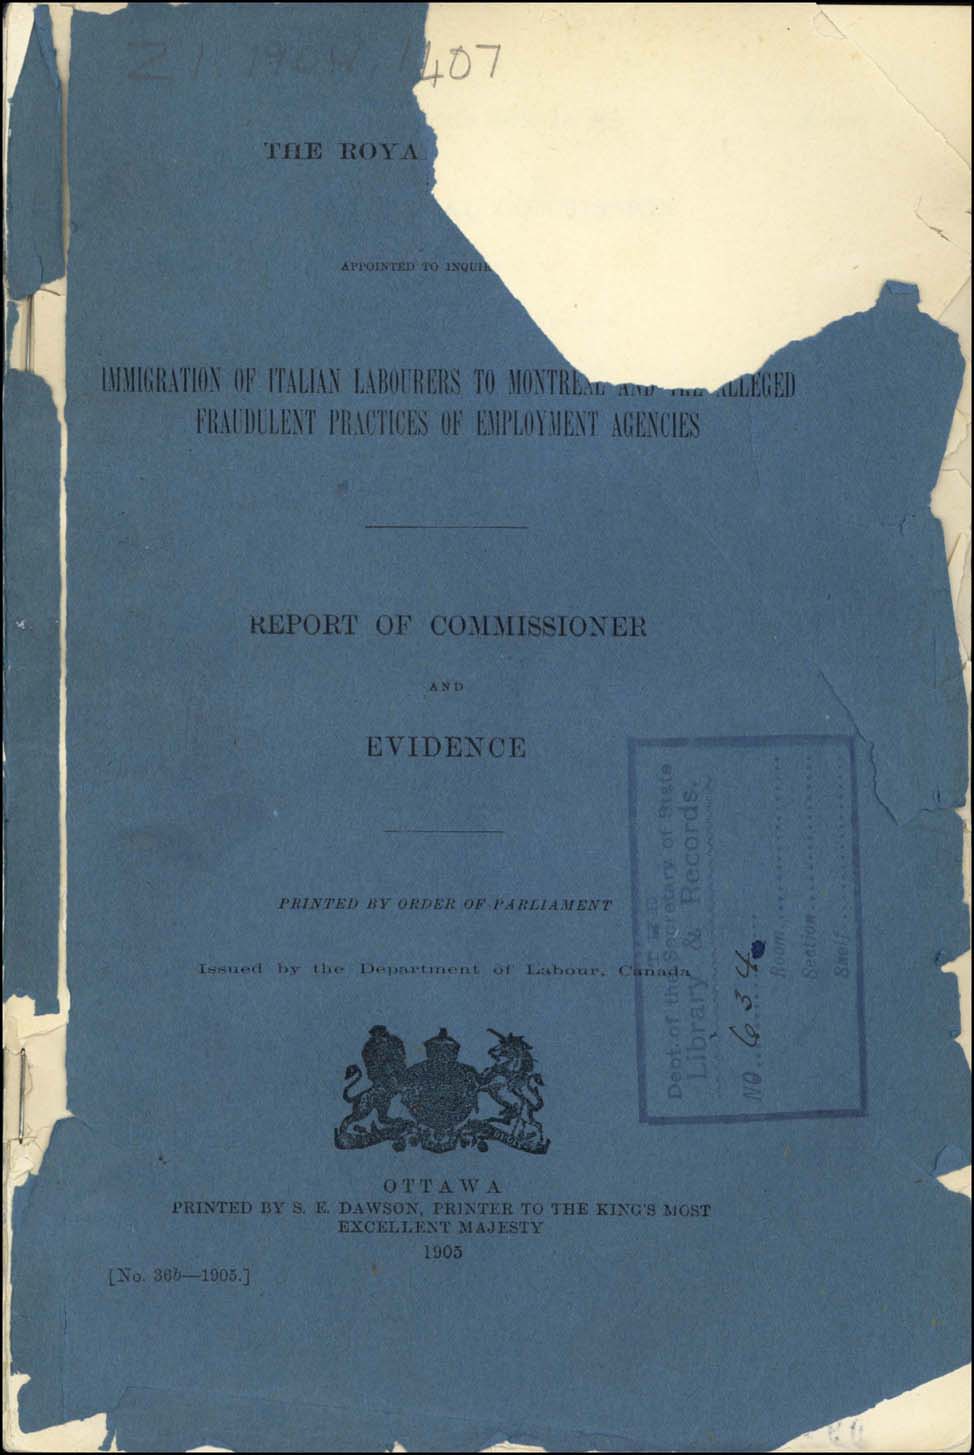 Royal Commission on Italian Immigration, 1904-1905